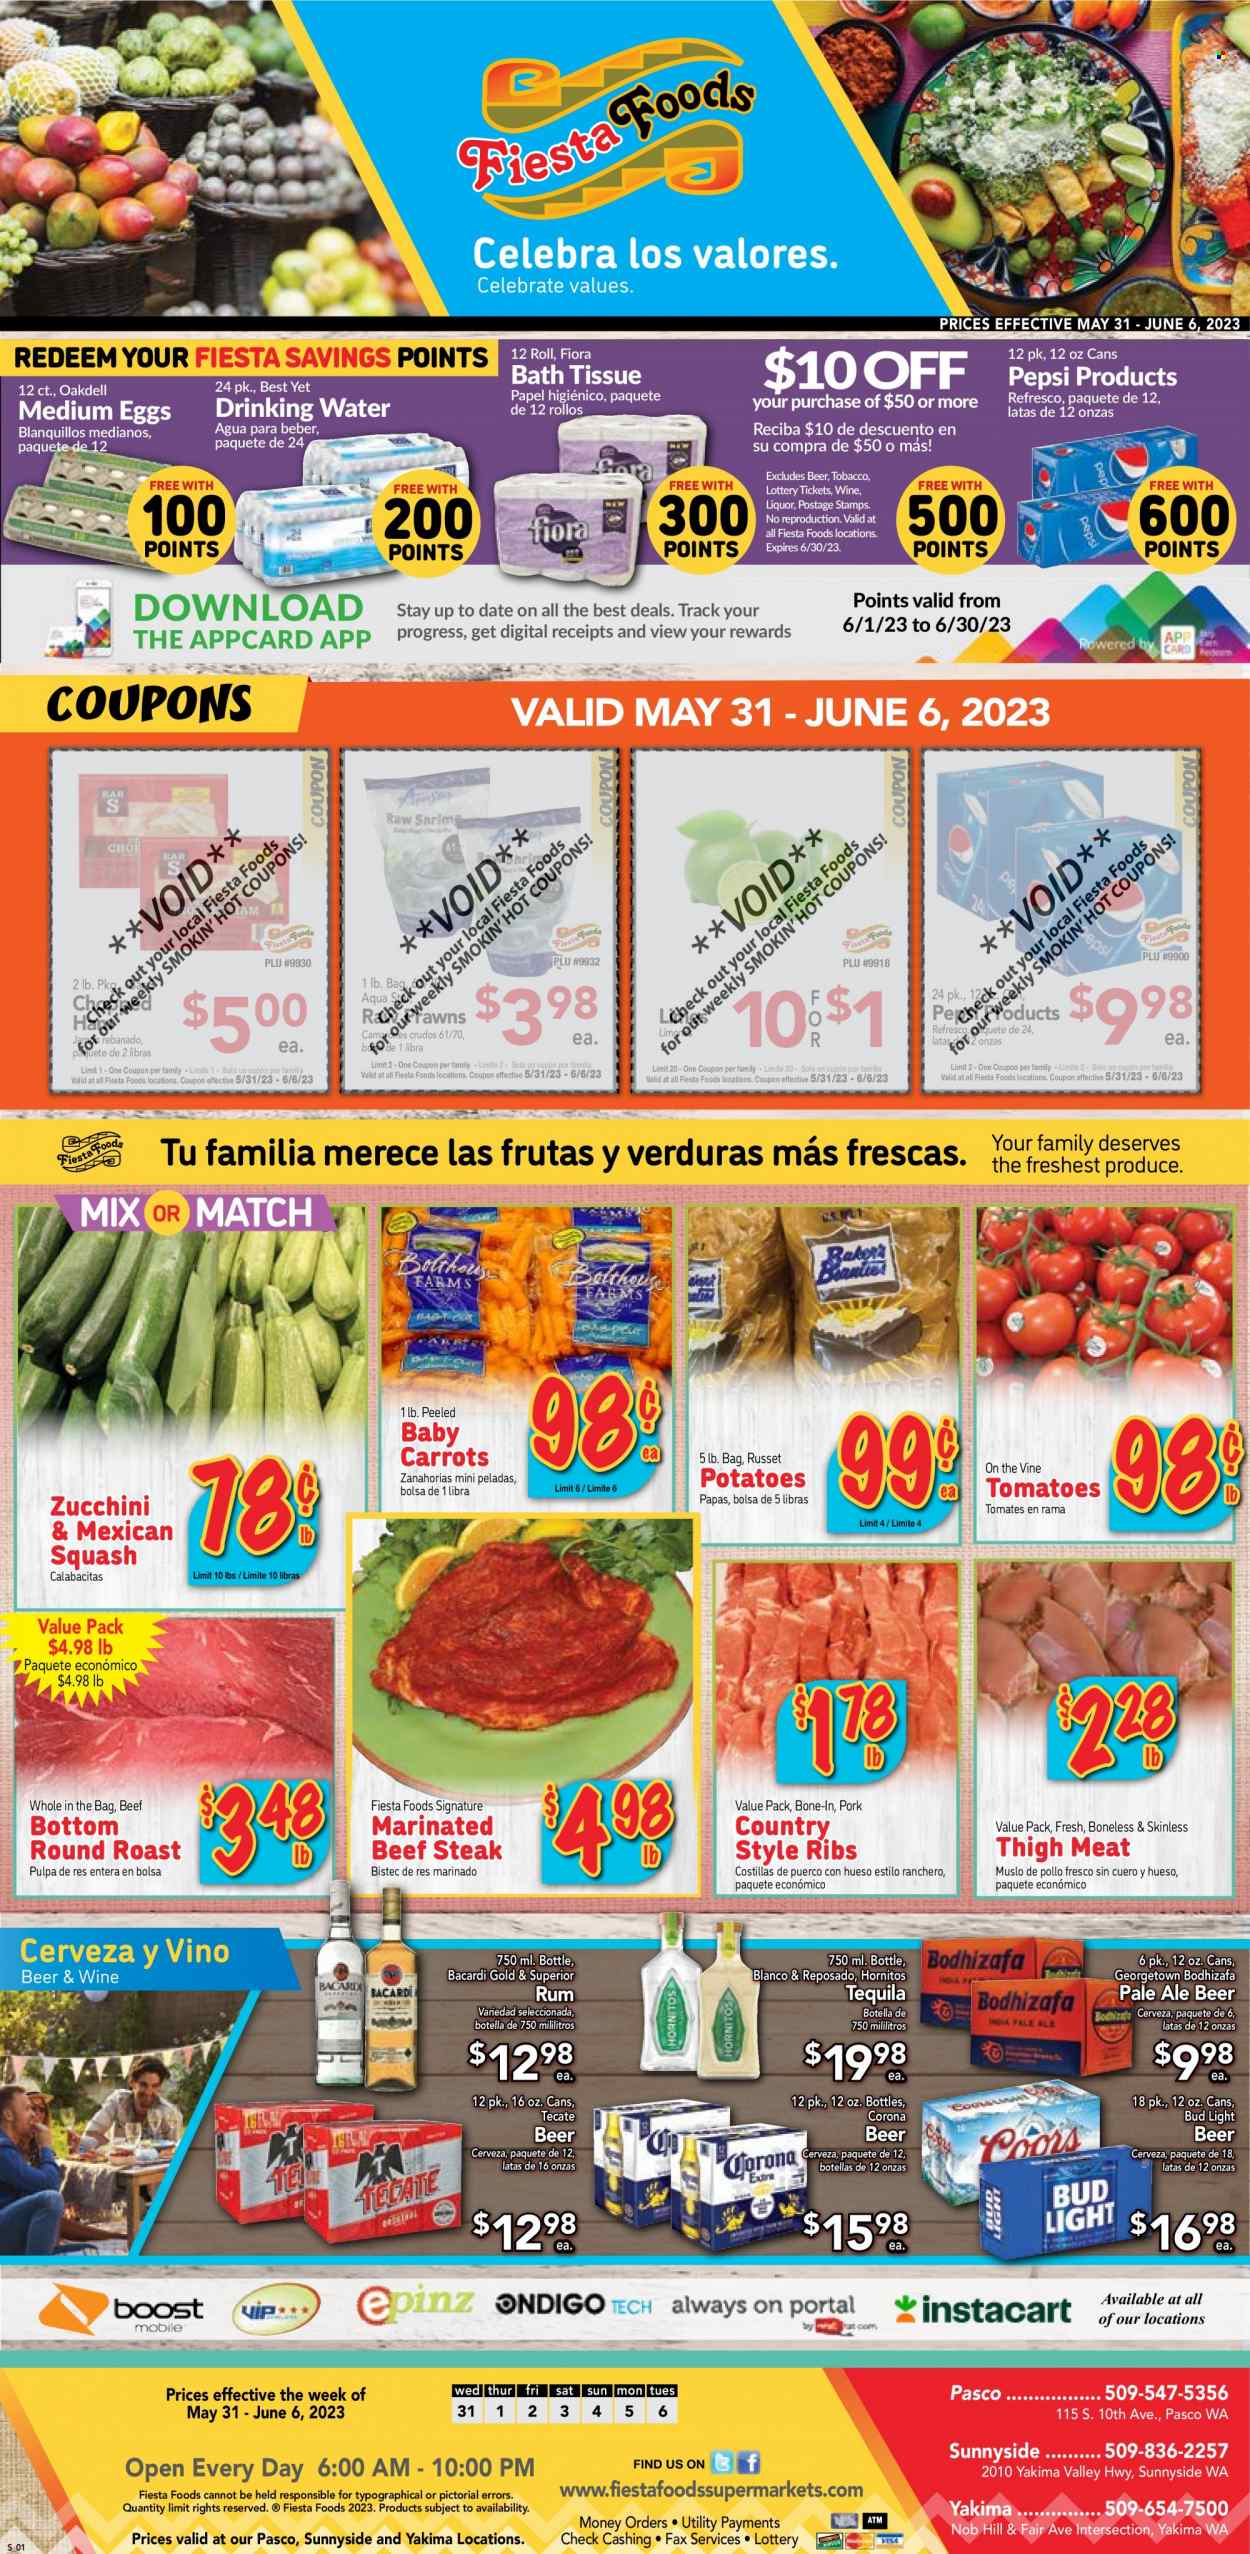 thumbnail - Fiesta Foods SuperMarkets Flyer - 05/31/2023 - 06/06/2023 - Sales products - carrots, russet potatoes, potatoes, mexican squash, limes, prawns, roast, ham, eggs, Rama, Pepsi, soft drink, water, wine, alcohol, Bacardi, rum, tequila, liquor, beer, Bud Light, Corona Extra, beef meat, beef steak, steak, round roast, marinated beef, ribs, pork ribs, country style ribs. Page 1.